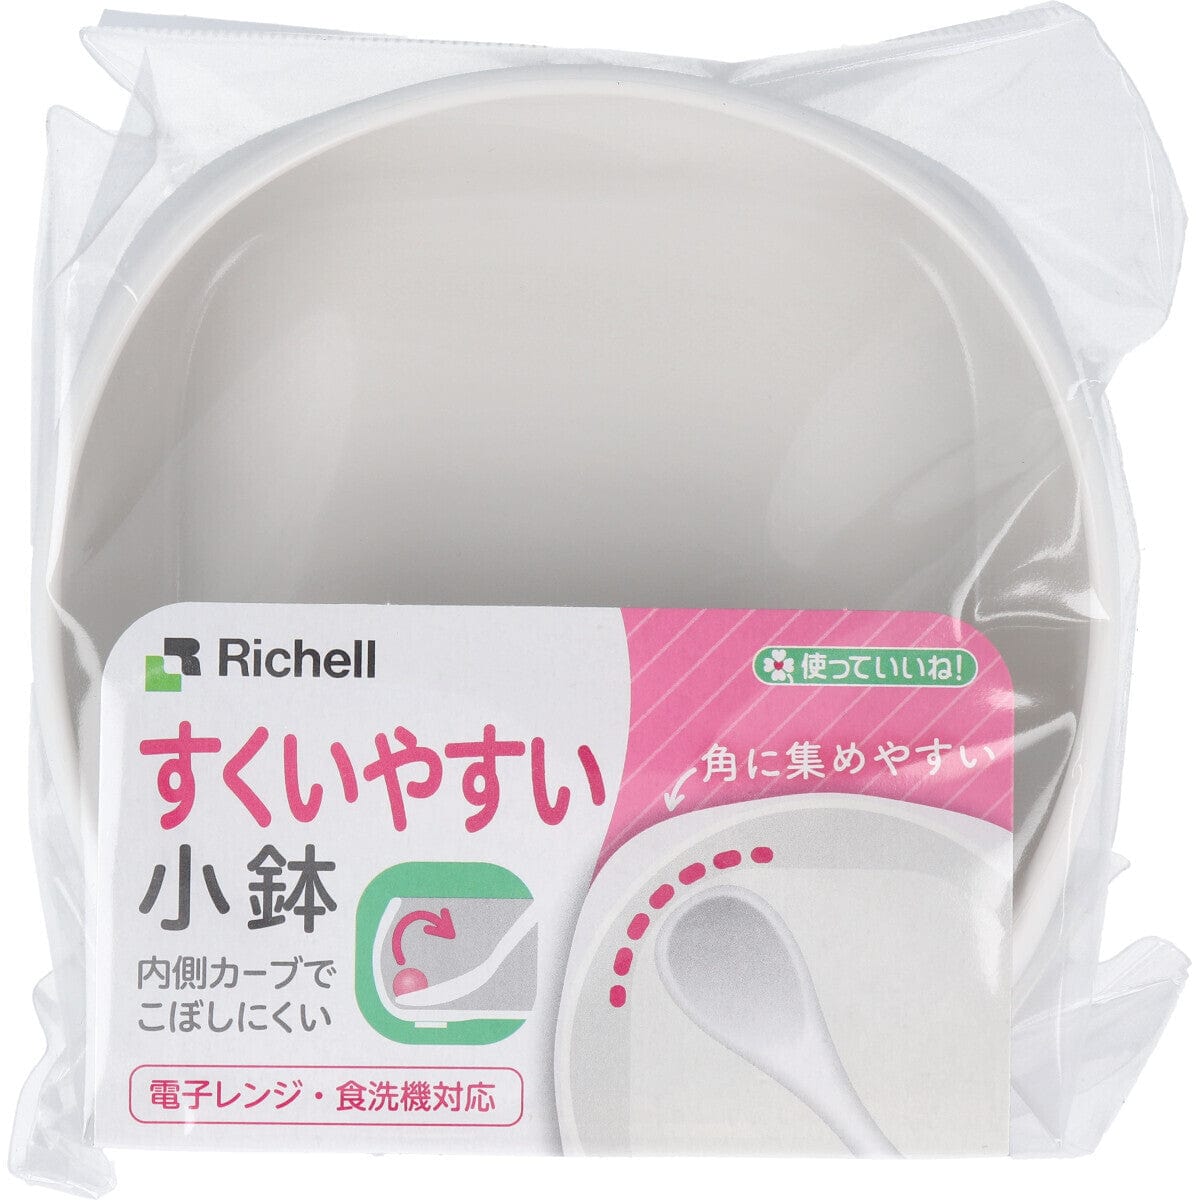 Richell - You Can Use It Easy Scooping Small Bowl -  Baby Bowl  Durio.sg